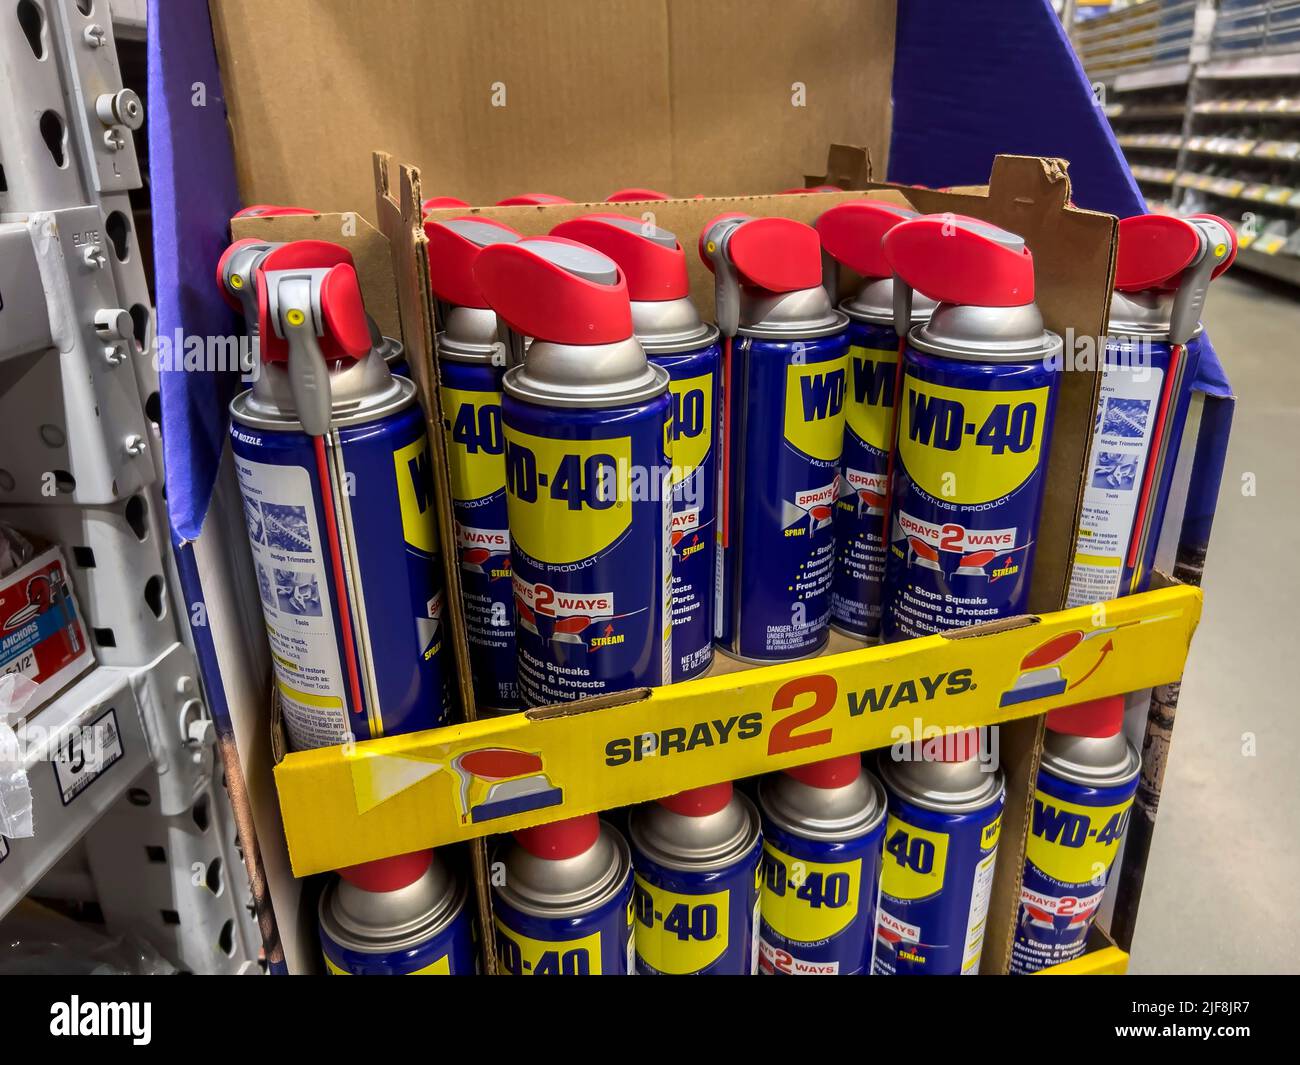 Seattle, WA USA - circa June 2022: Close up view of WD-40 products for sale inside a Lowe's home improvement store. Stock Photo